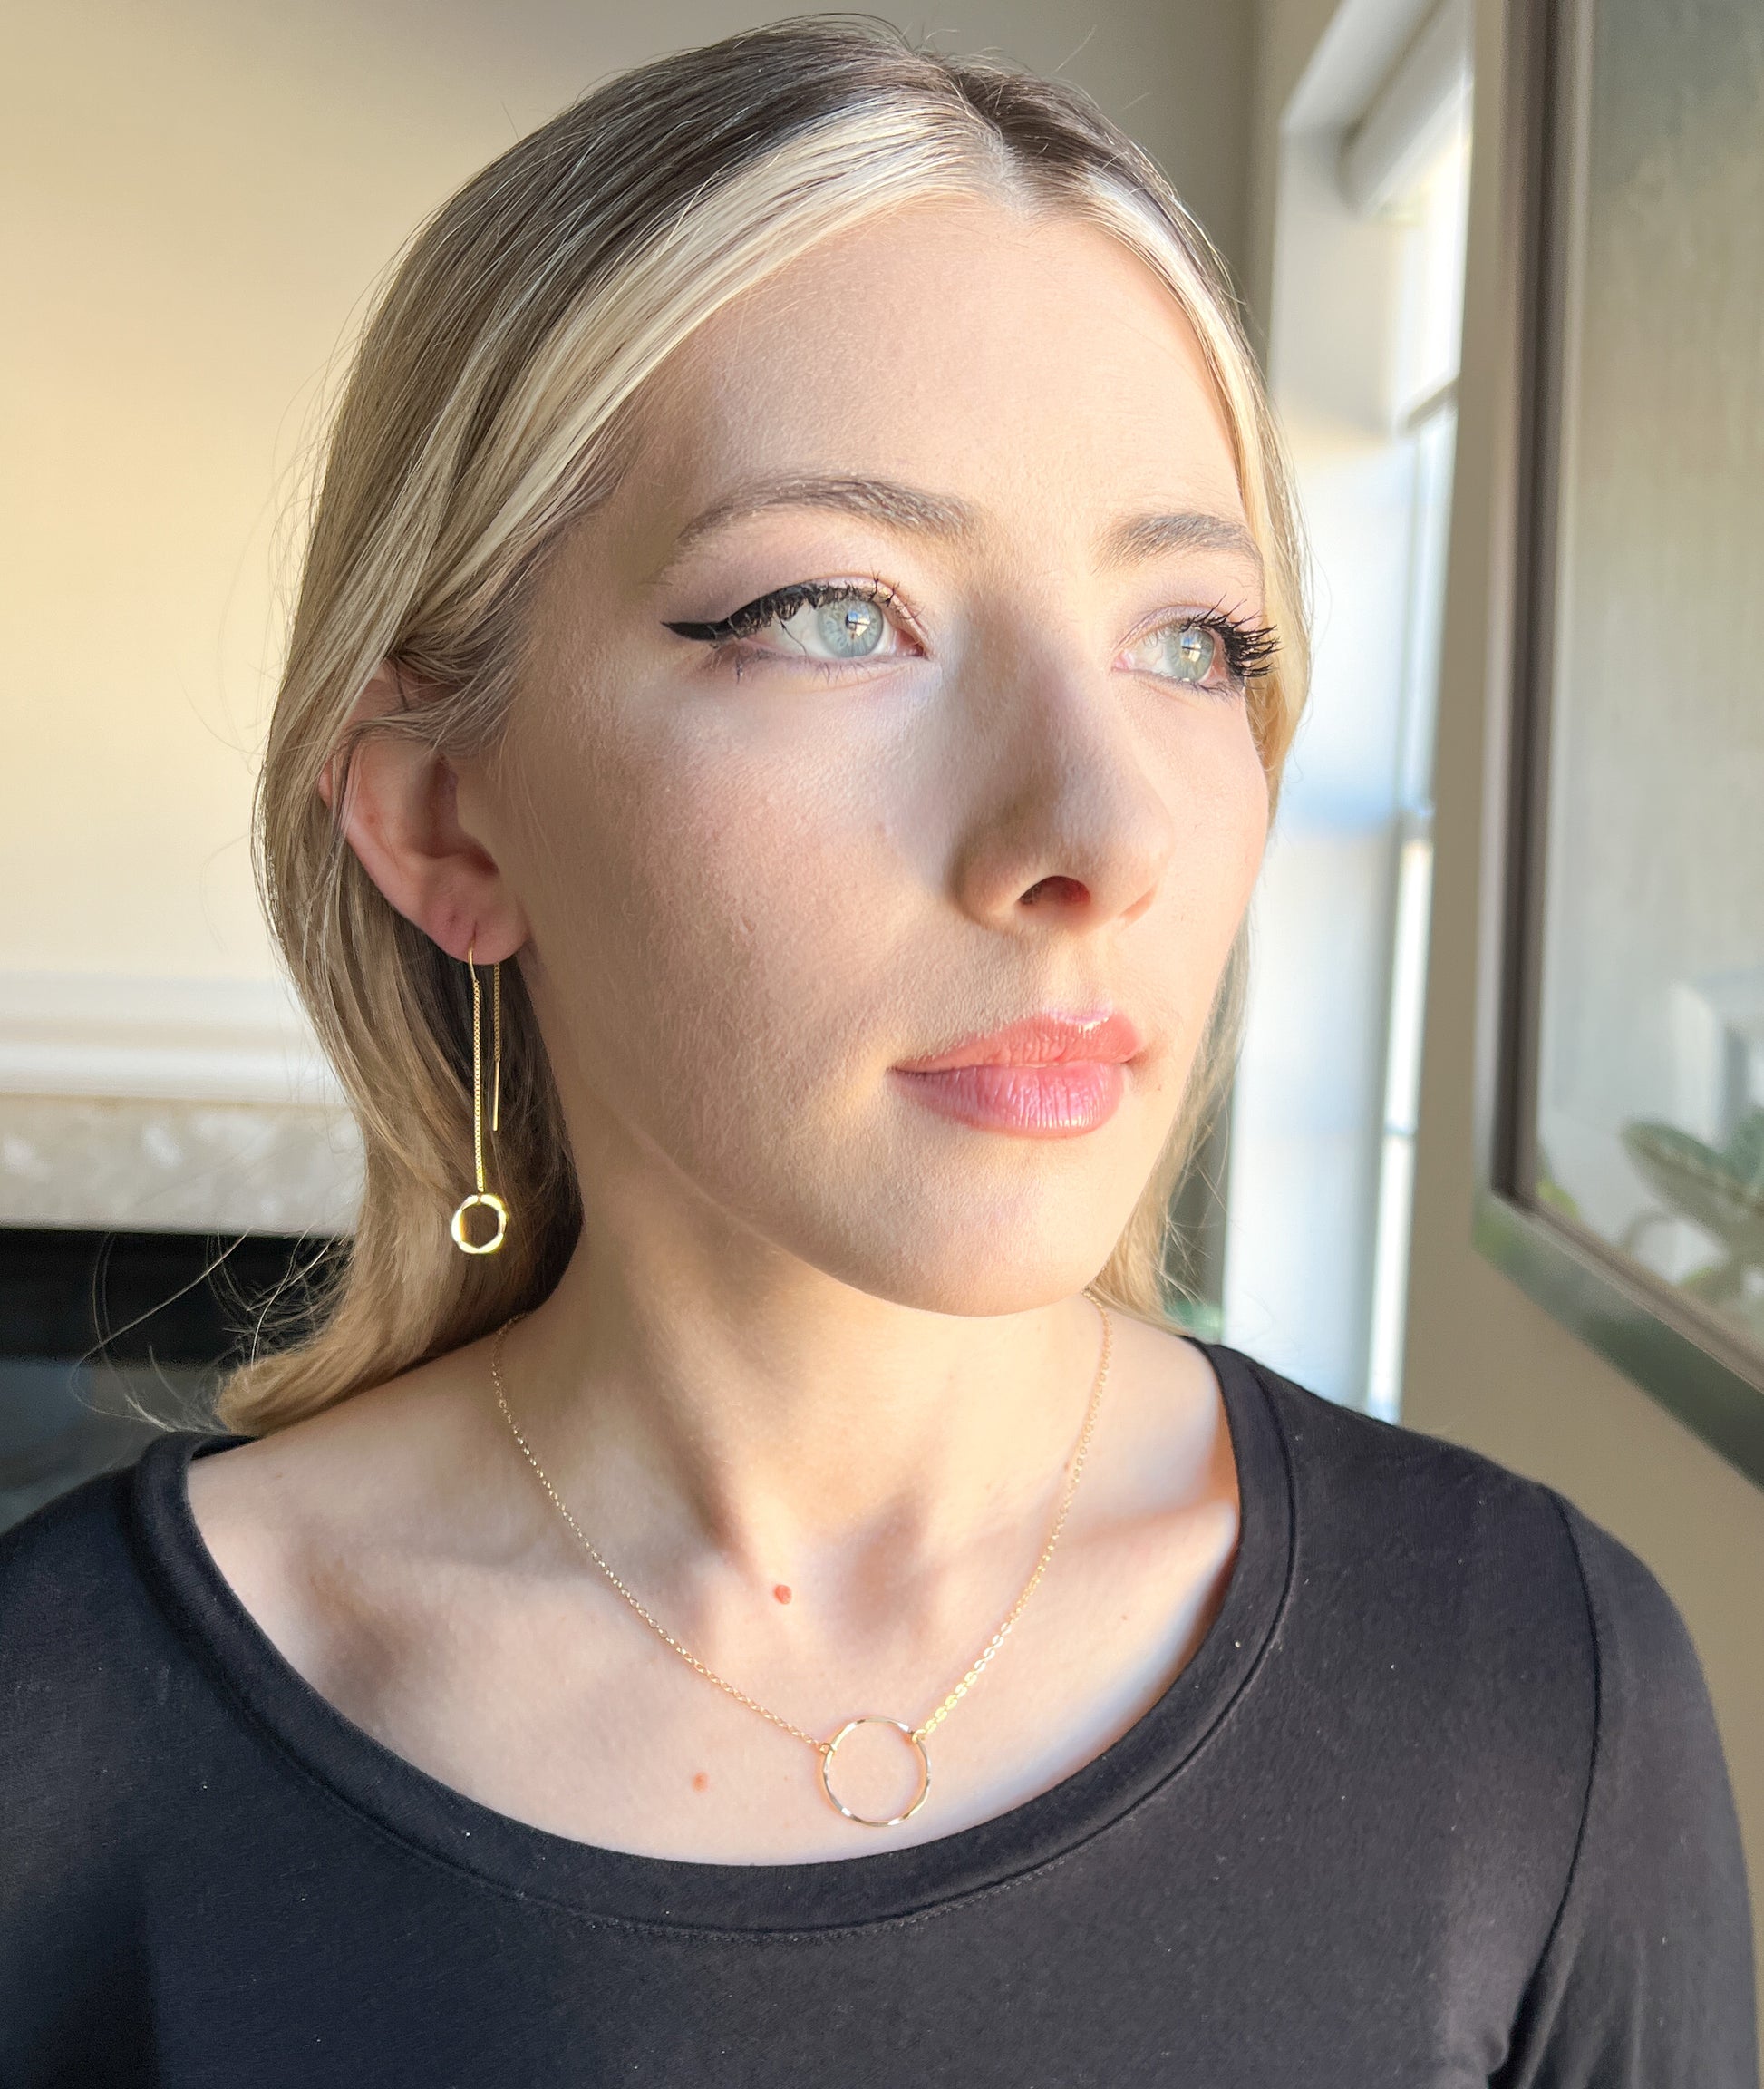 Lightweight threader earrings.  Model is wearing long dangle gold threader earrings with small gold hammered circle in front.